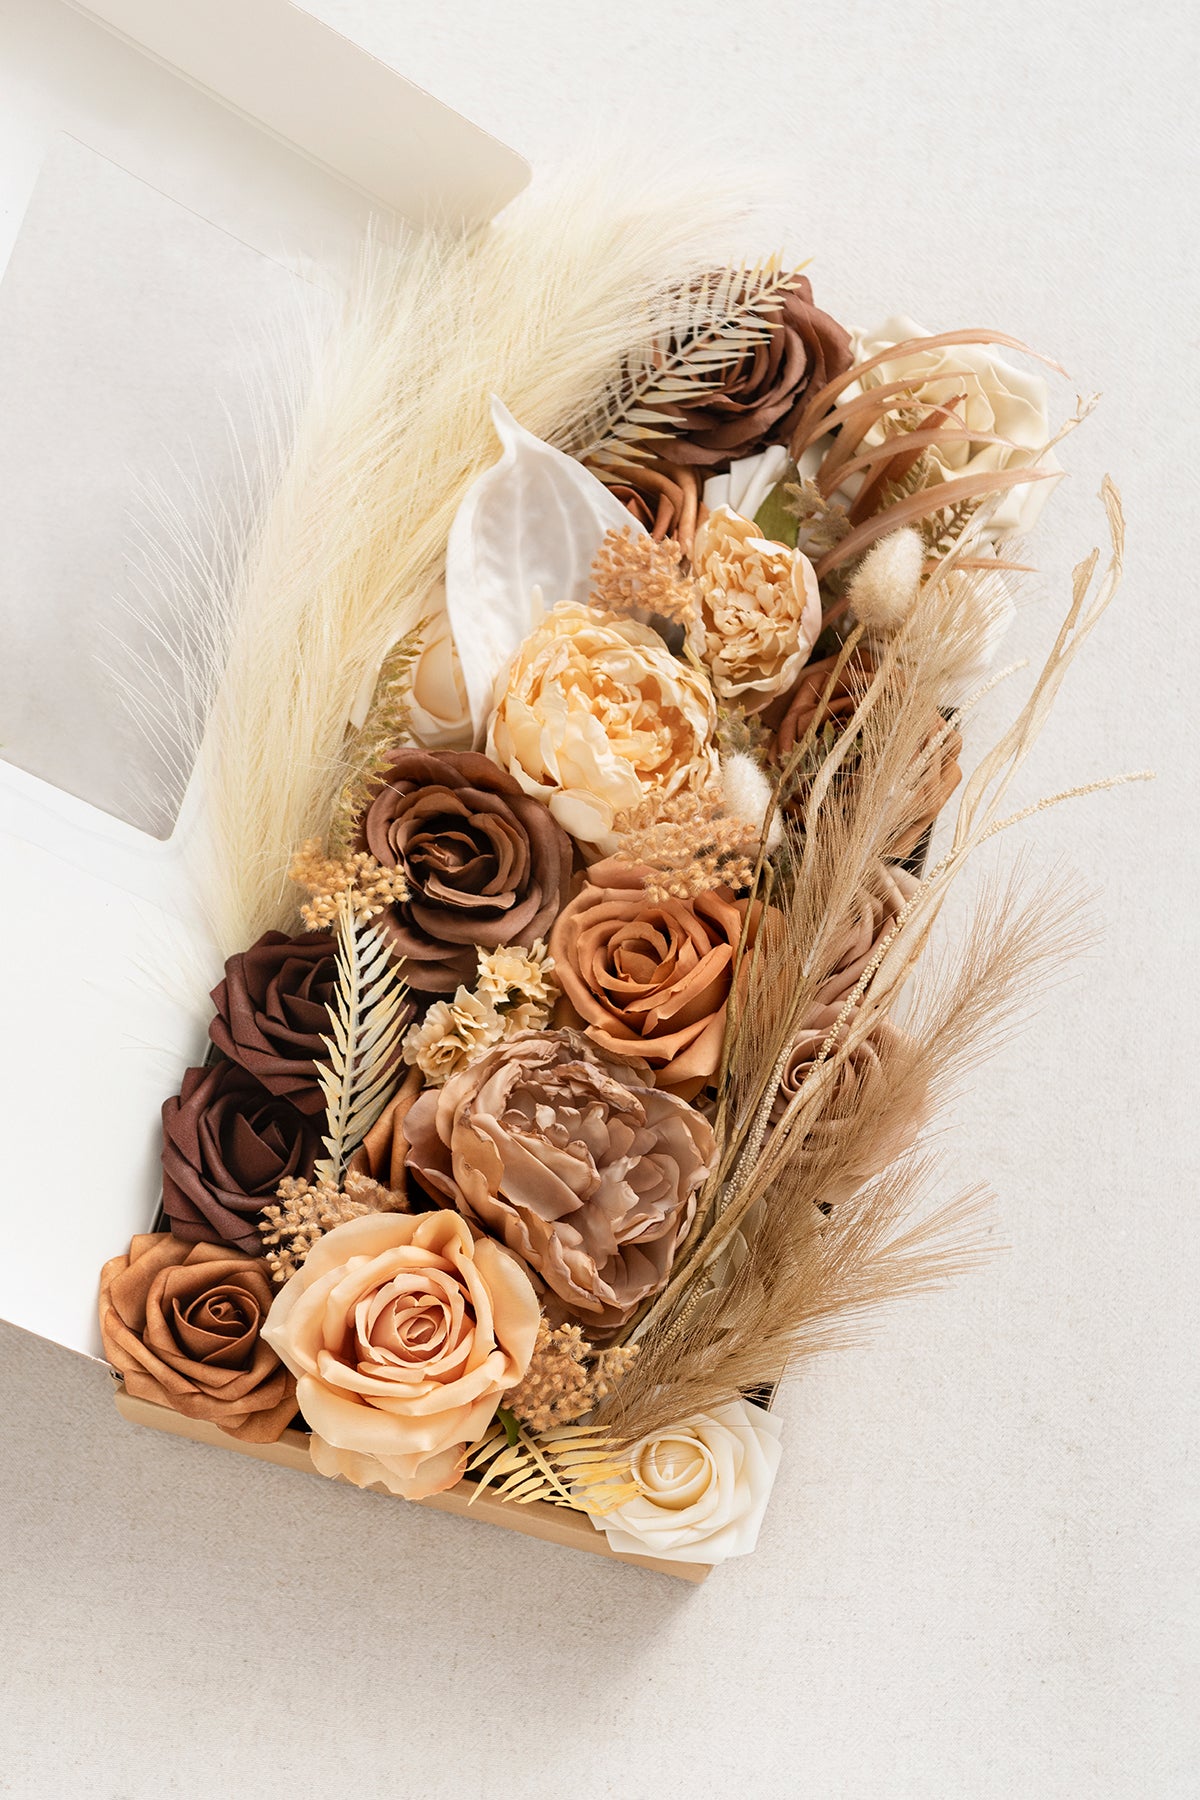 Gold & Ivory White Prom Corsage - Dried Flowers Forever